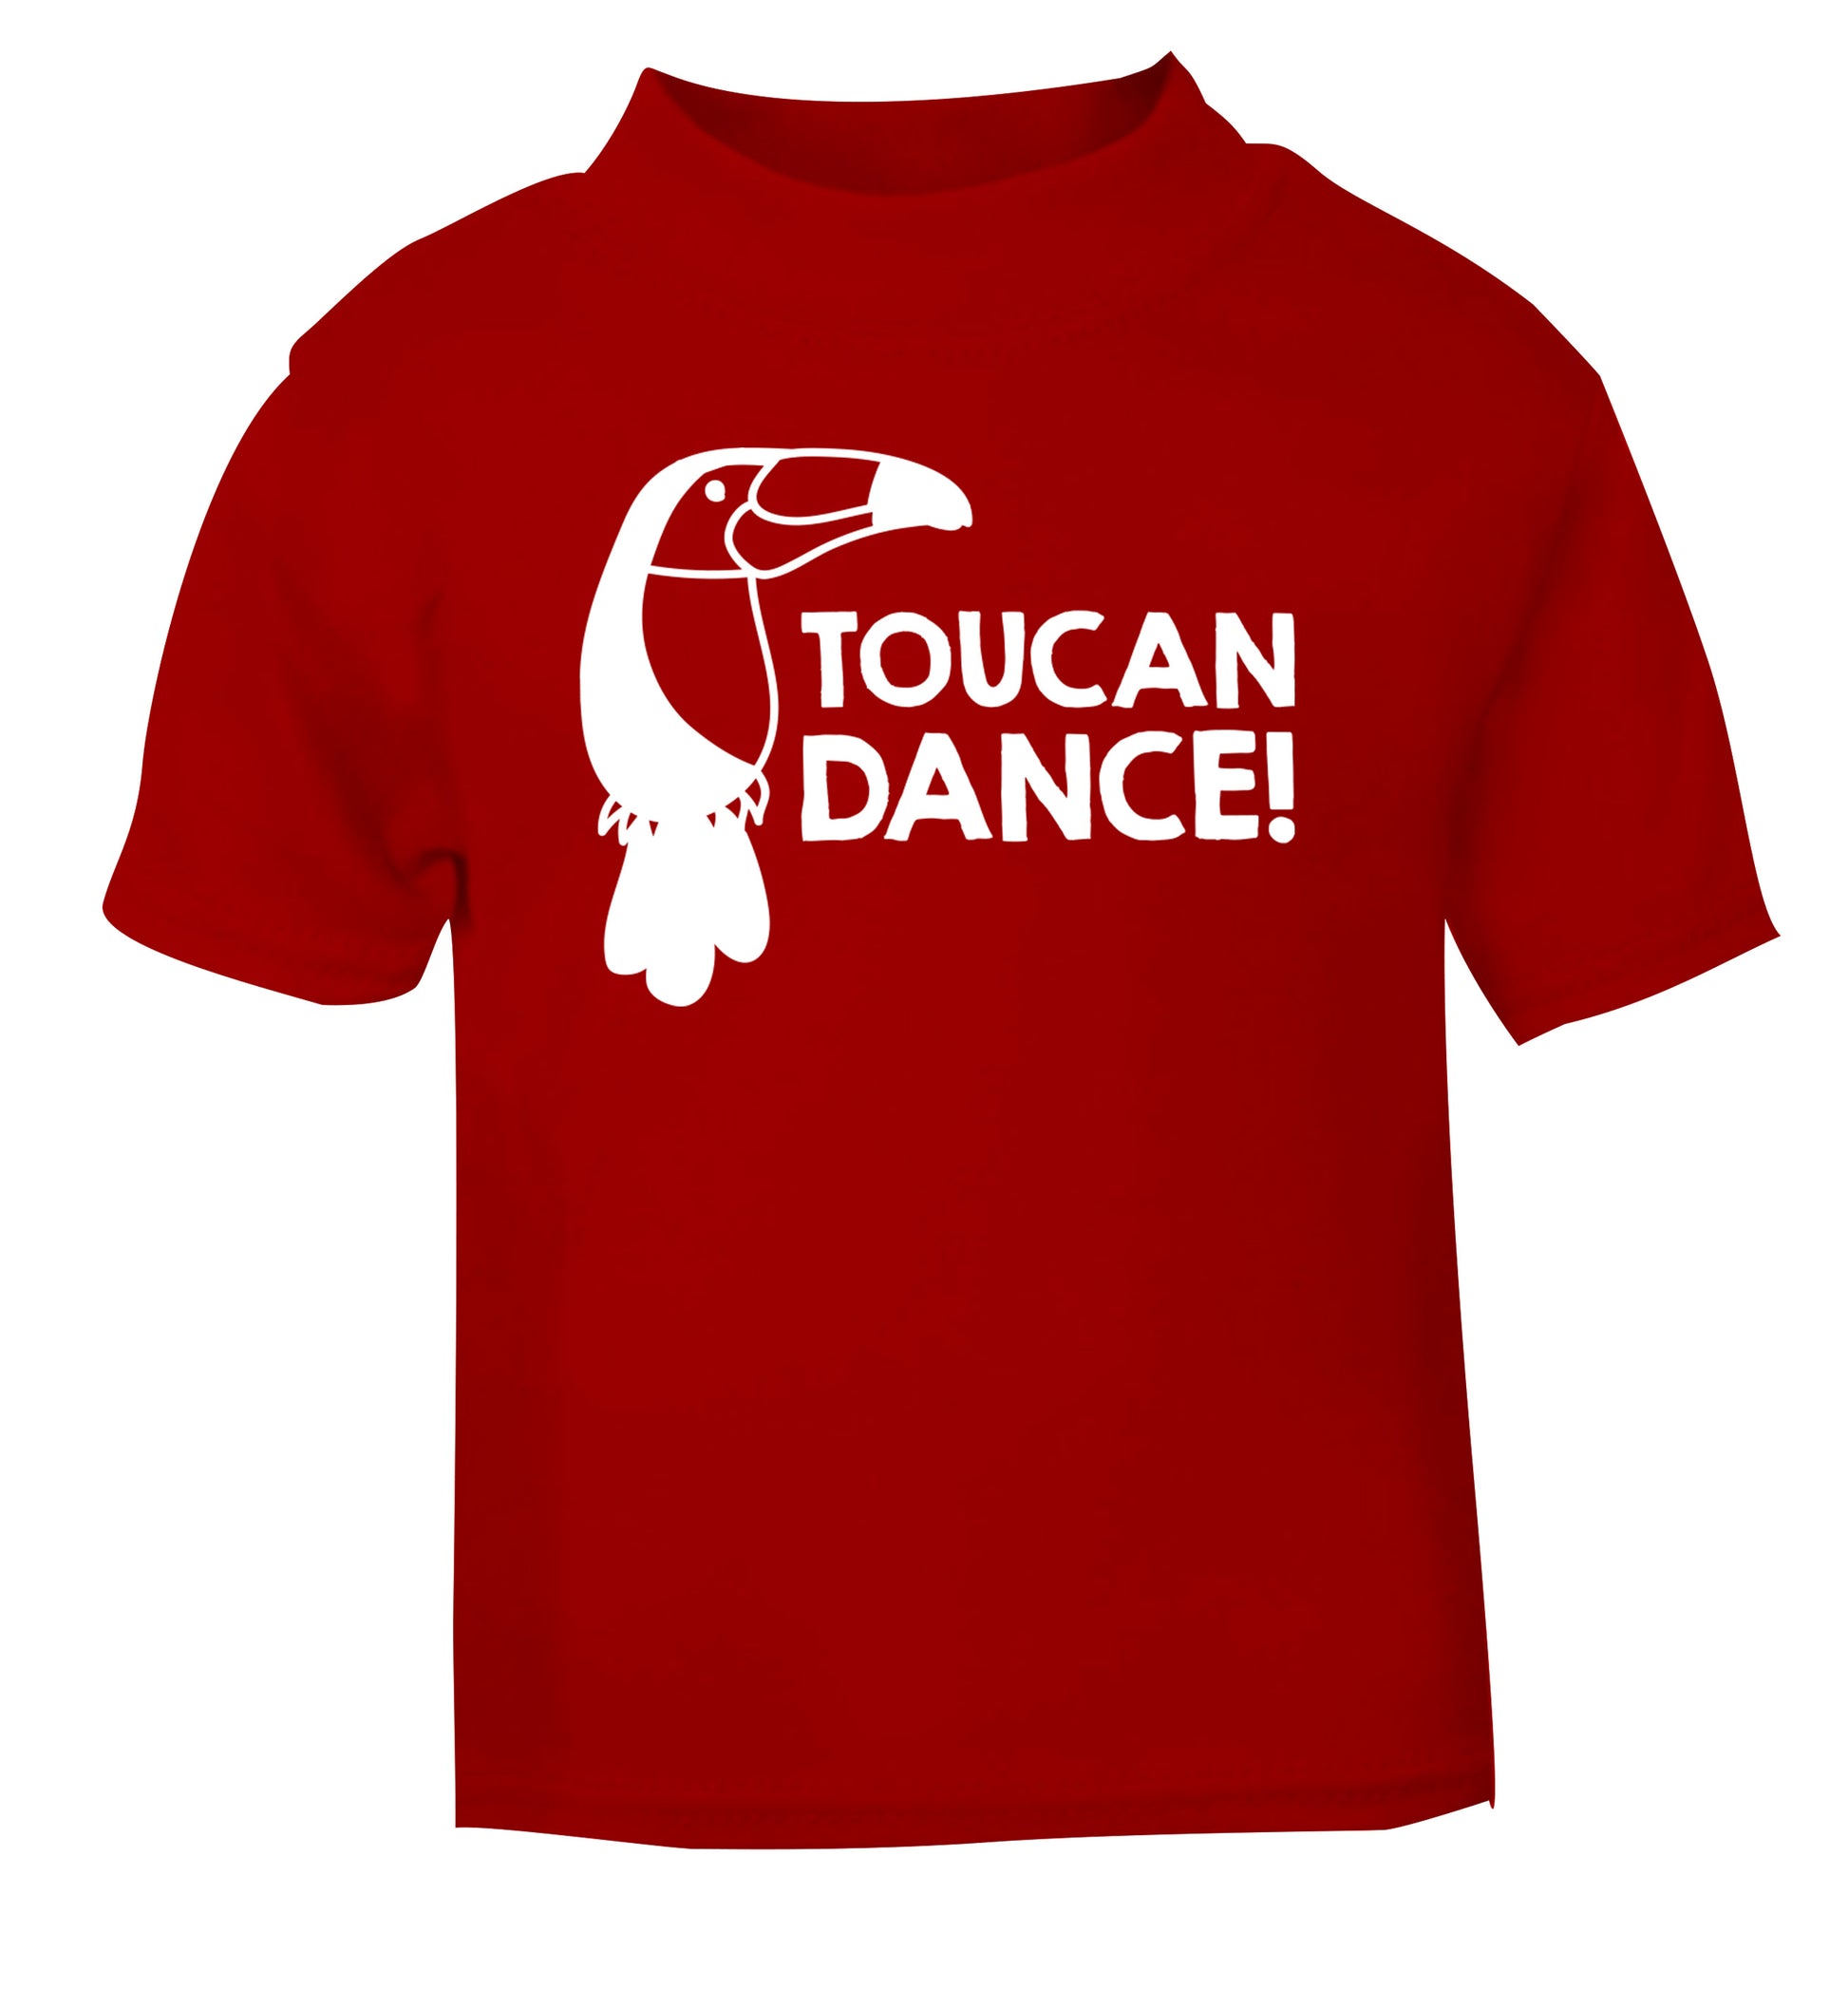 Toucan dance red Baby Toddler Tshirt 2 Years